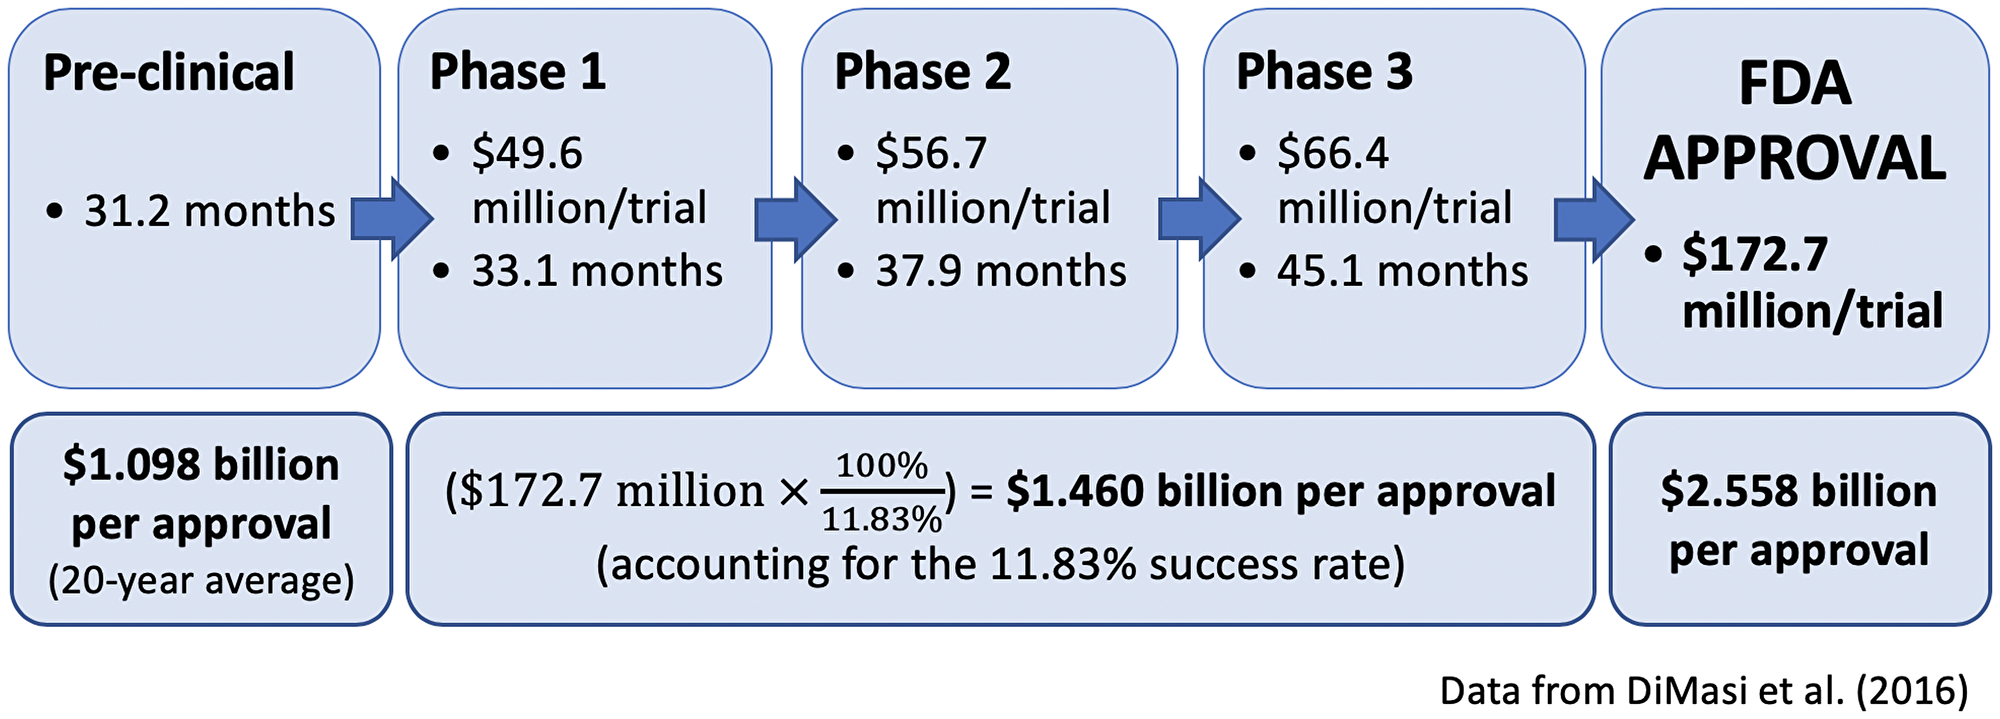 Summary of the time and cost for drug development (modified from DiMasi et al. [2016]).